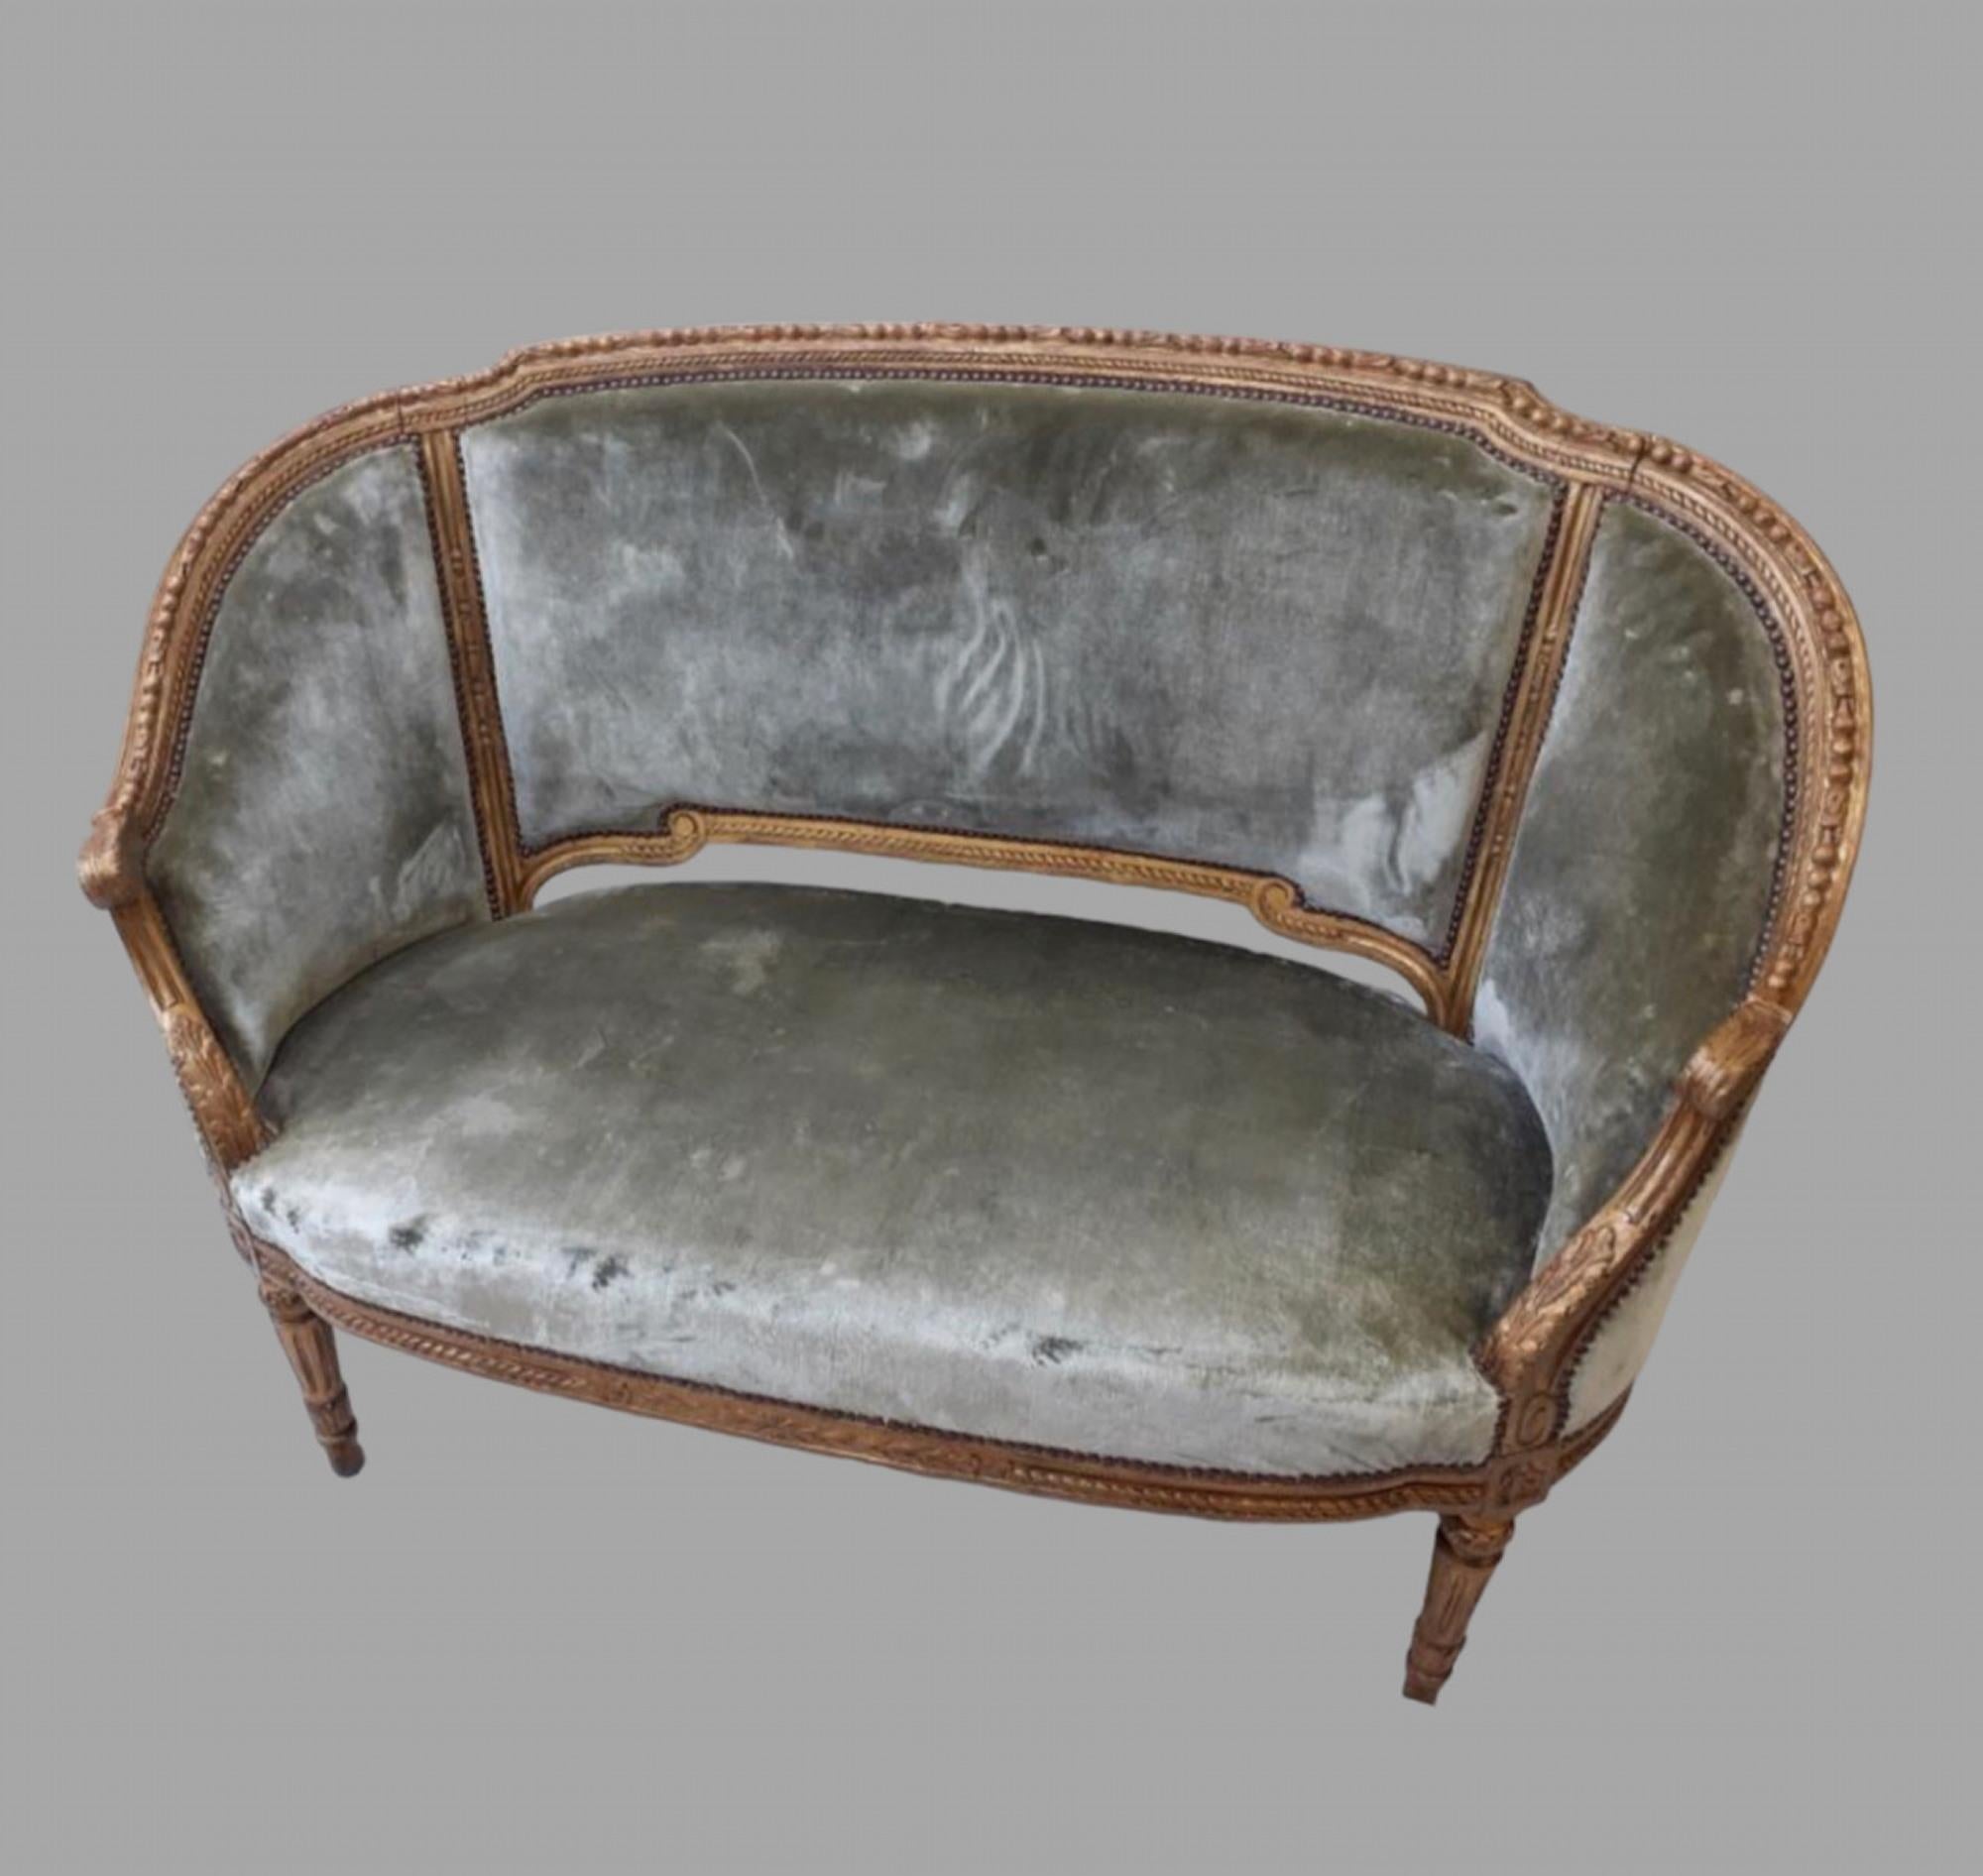 An Early 20thc French Giltwood Canape covered in a silk original velvet with very small wear.. The frame has a continuous carved frieze ending in a leaf design terminating in tapered fluted legs. The bottom rail has a matching carving around it